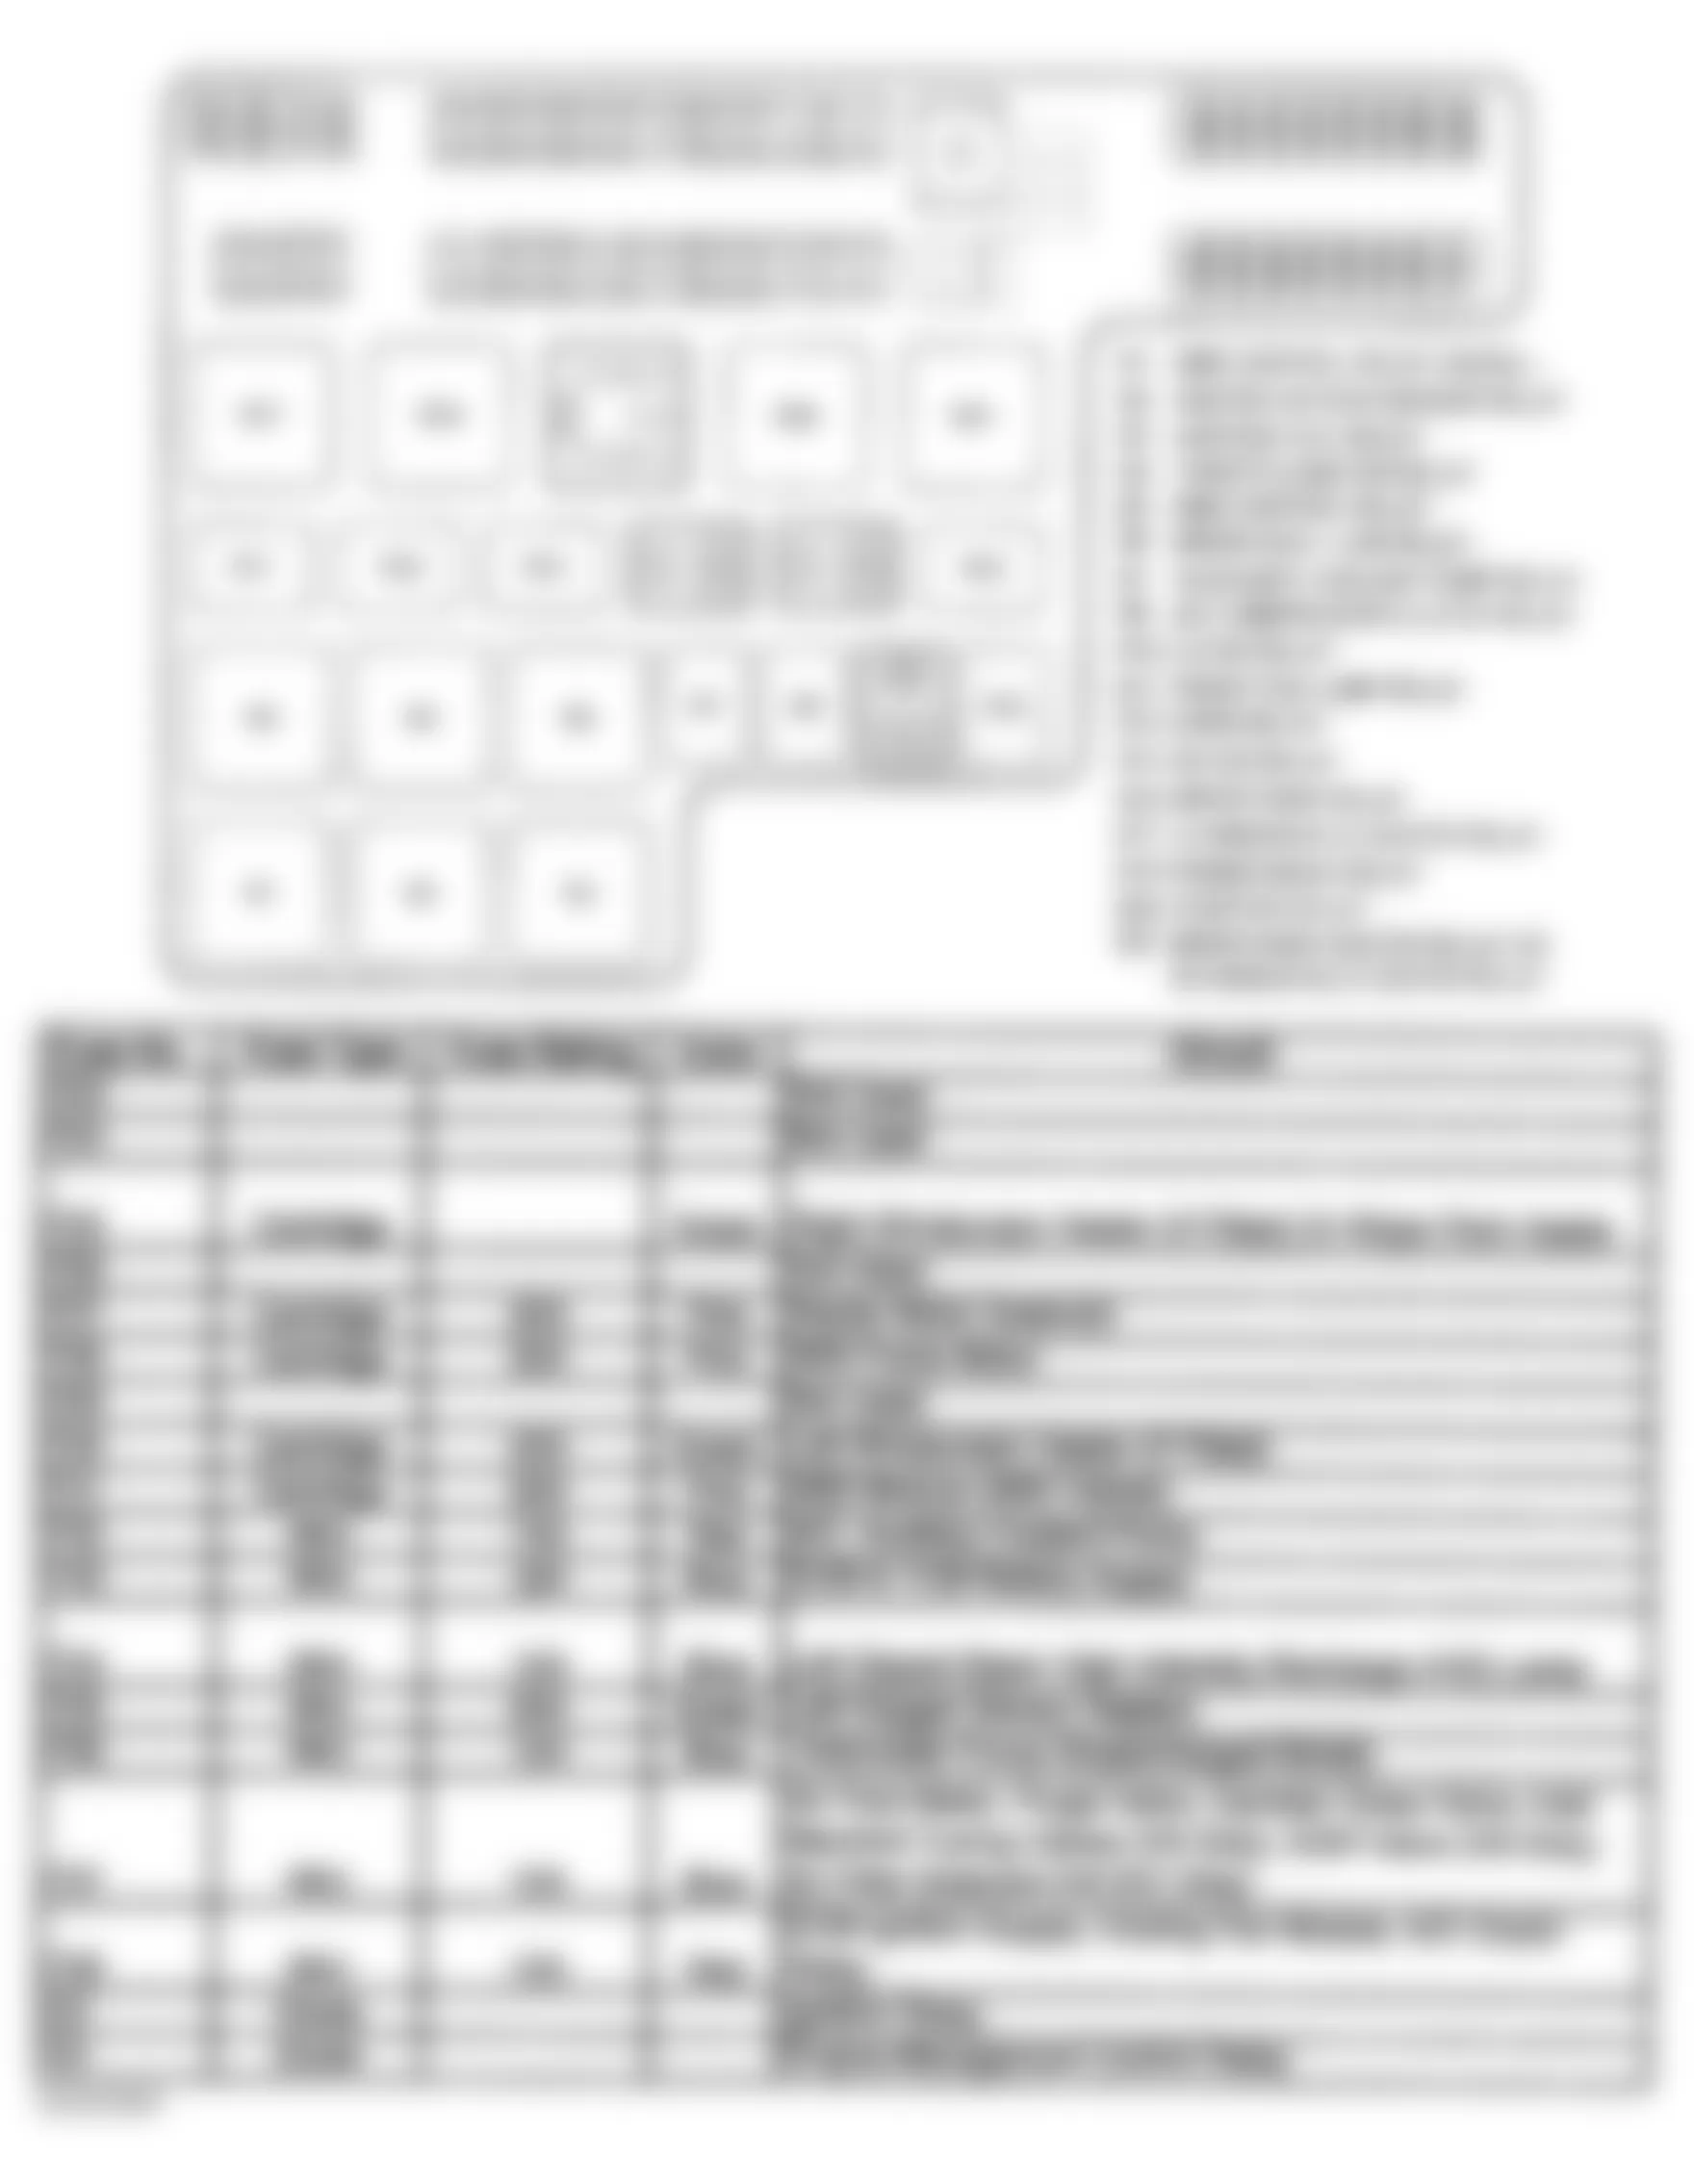 Jaguar S-Type 2004 - Component Locations -  Identifying Fuses & Relays - Front Power Distribution Fuse Box (Fuses No. 23-39; Diodes D3 & D4)